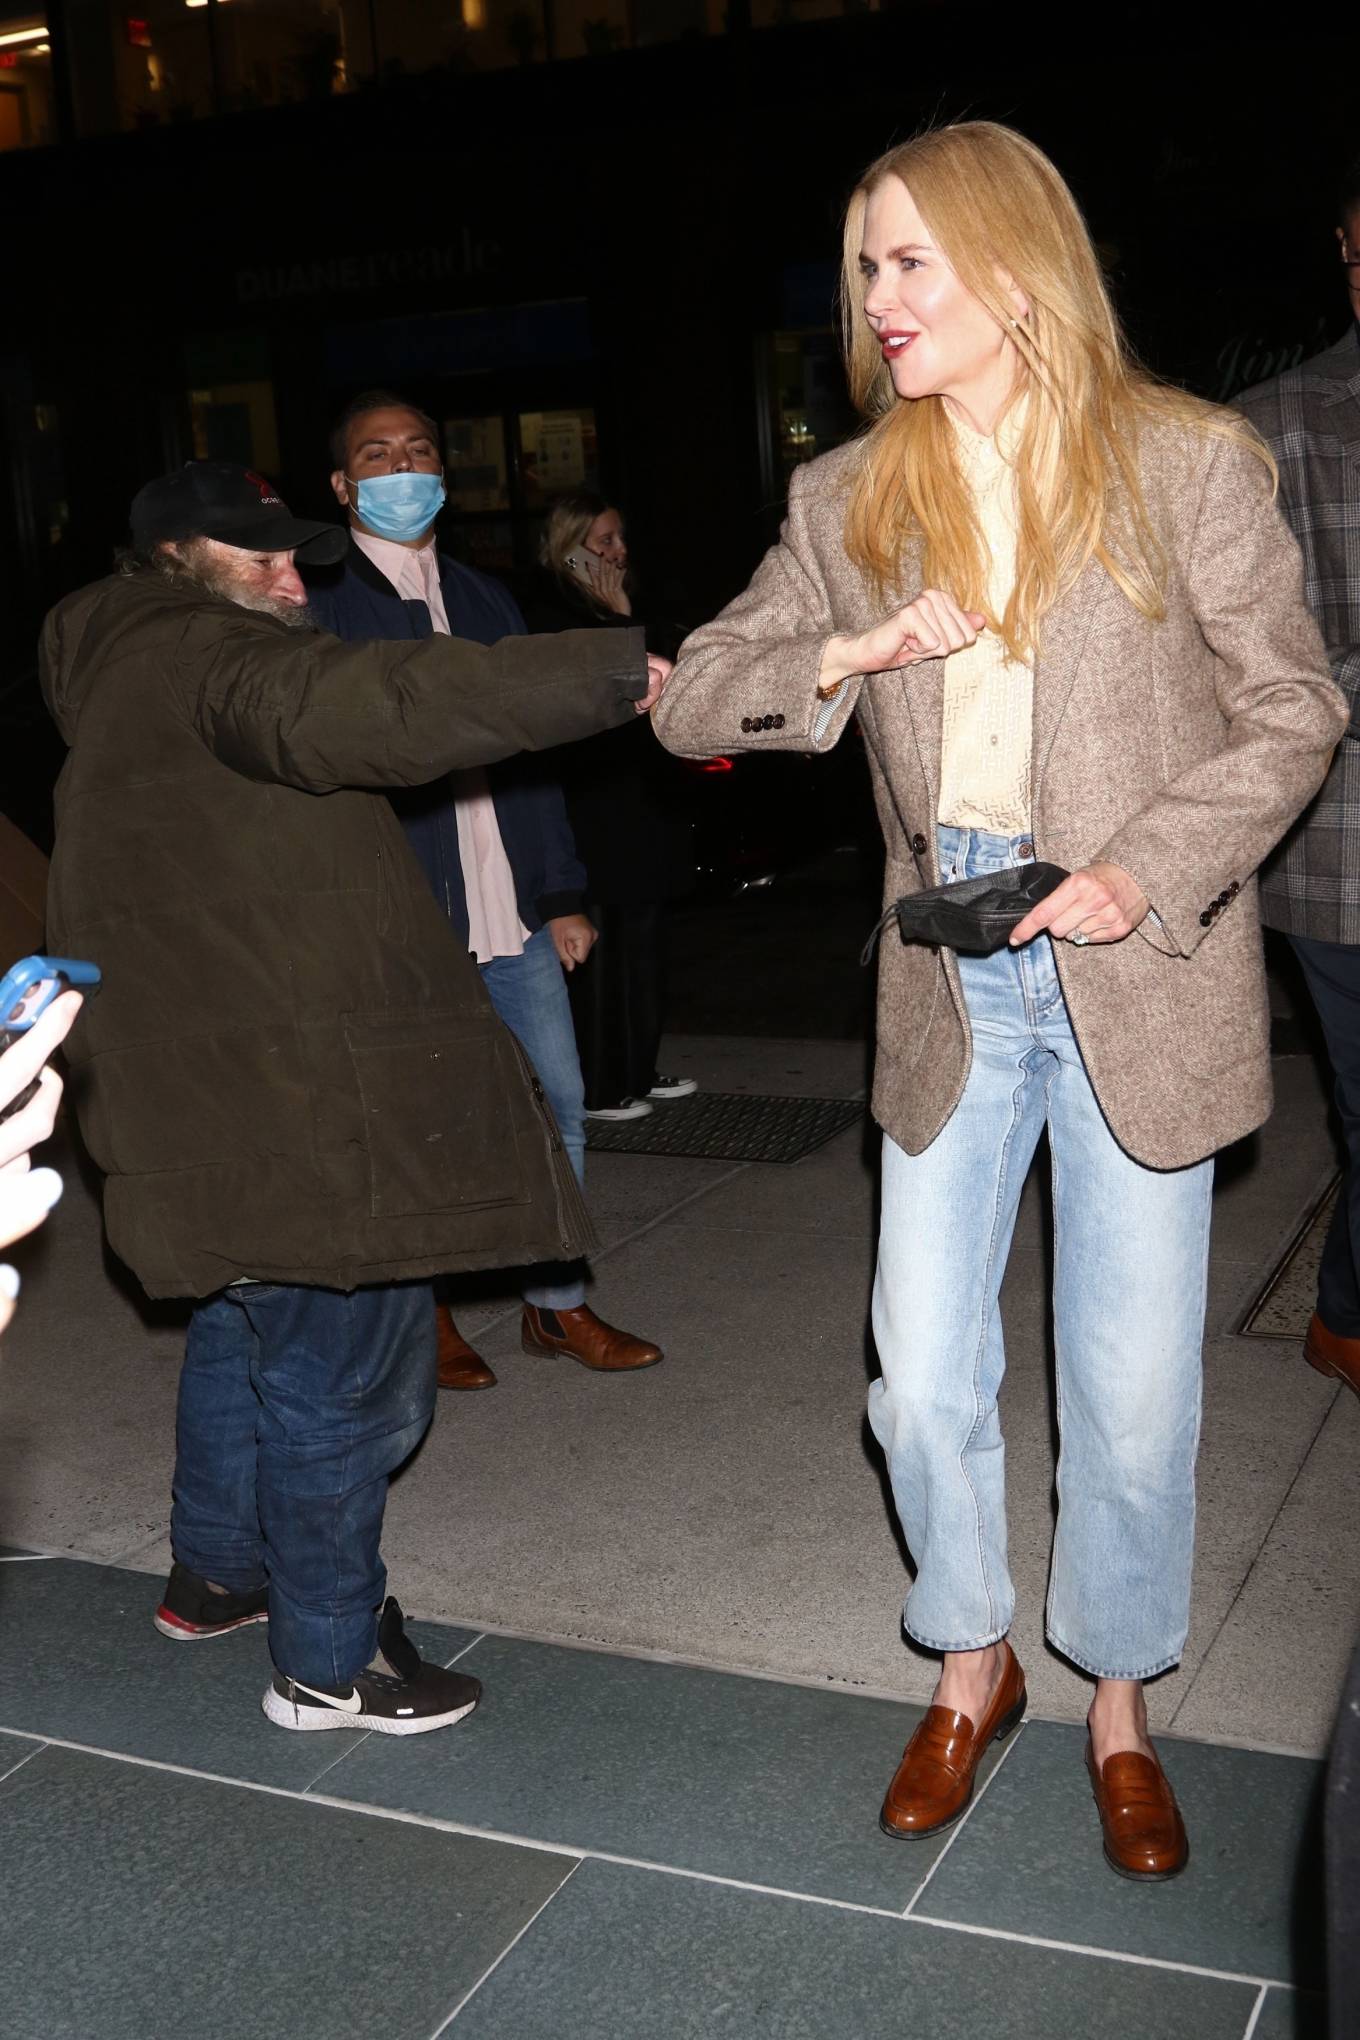 Nicole Kidman - Seen doing promotions for Being the Ricardos in New York